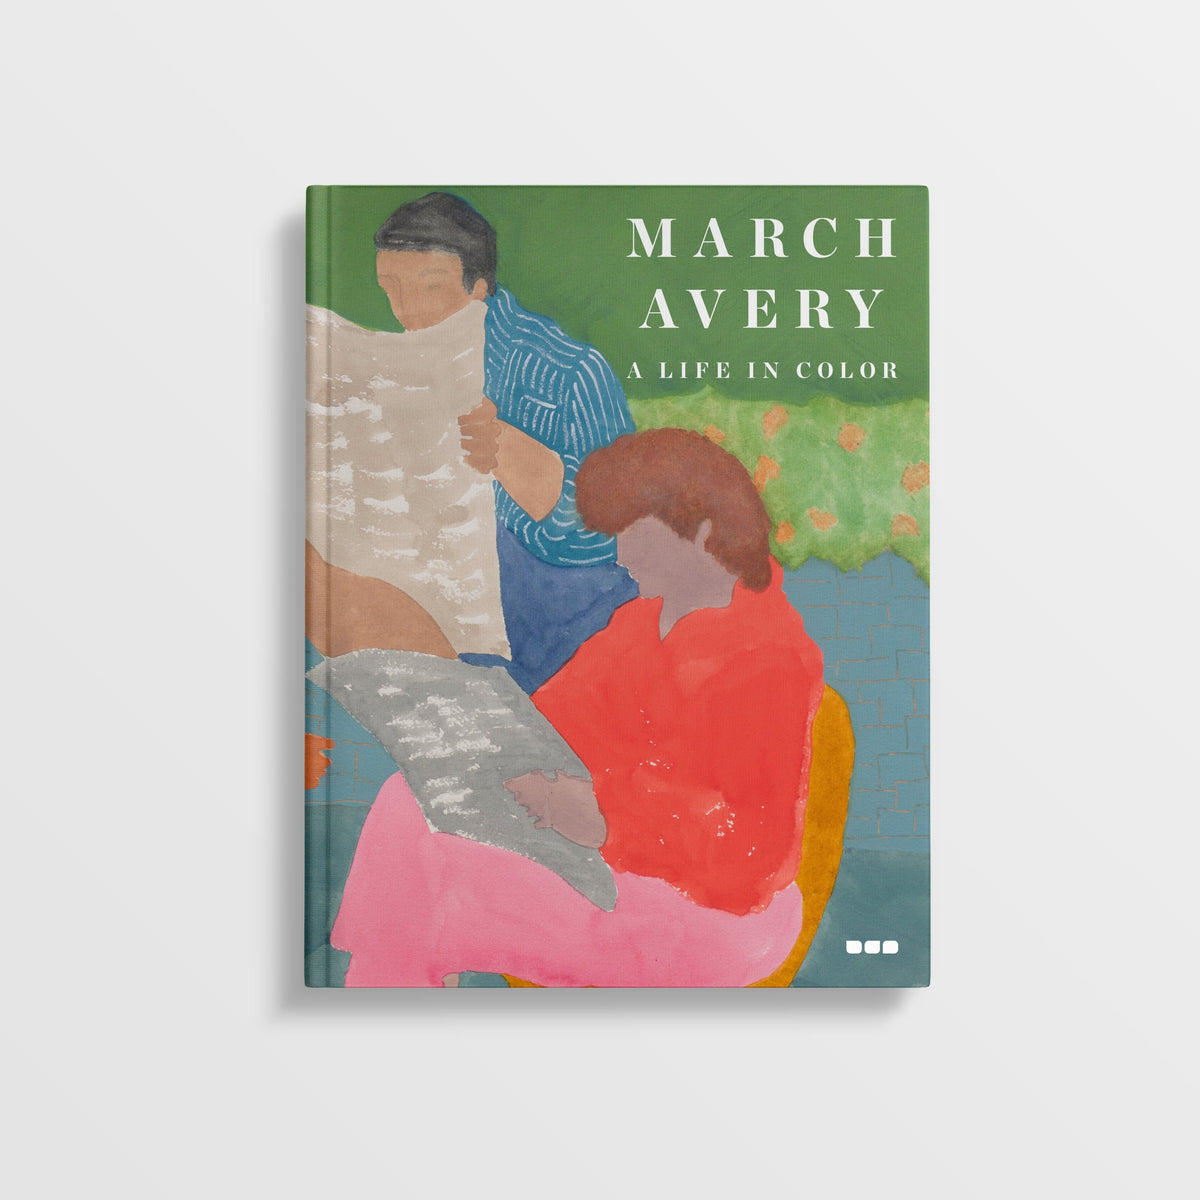 March Avery: A Life in Color